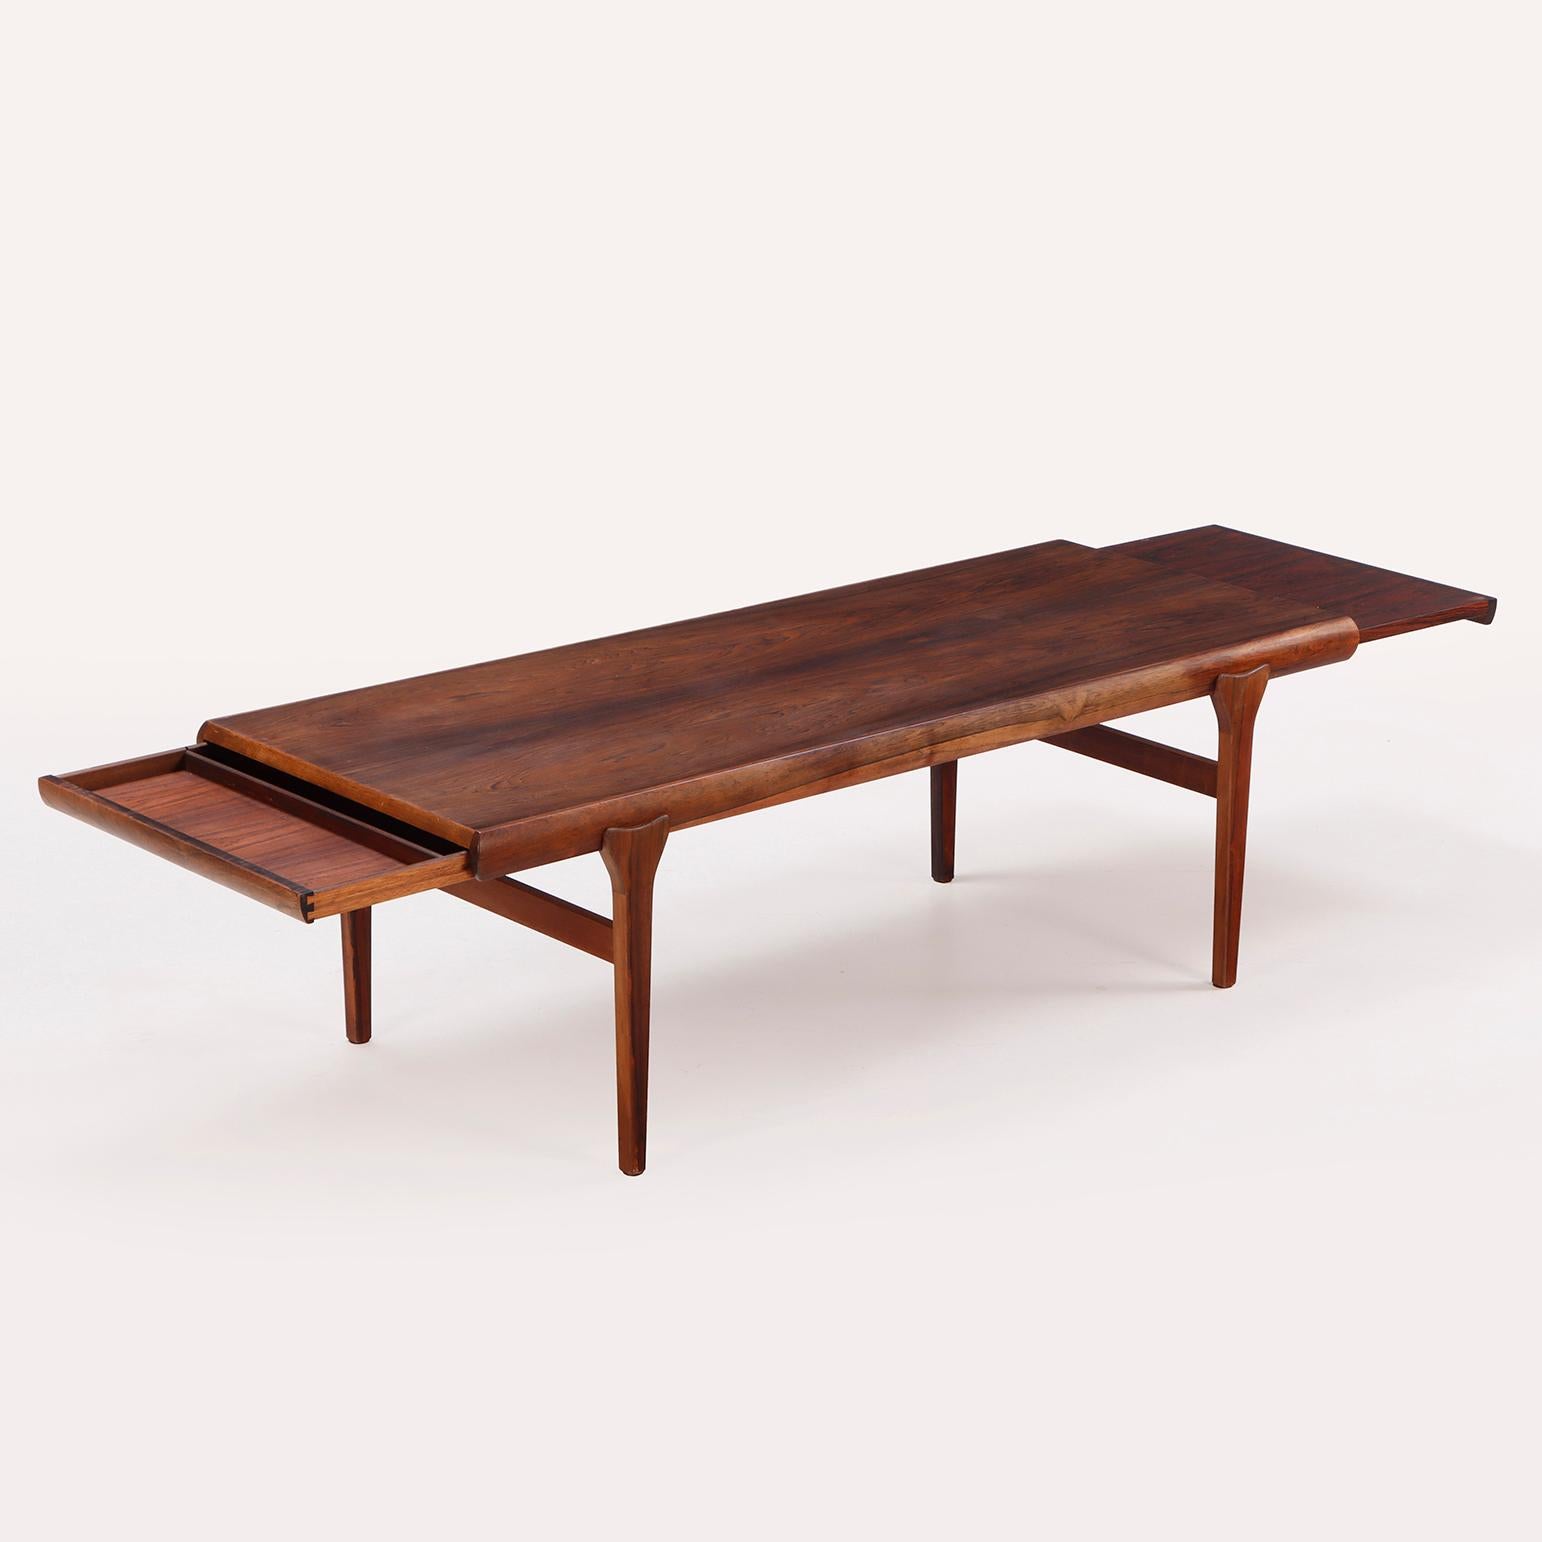 A mid century modern Danish rosewood coffee table by Johannes Andersen for Uldum Møbelfabrik circa 1960. Having pull-out slides on each side of table.